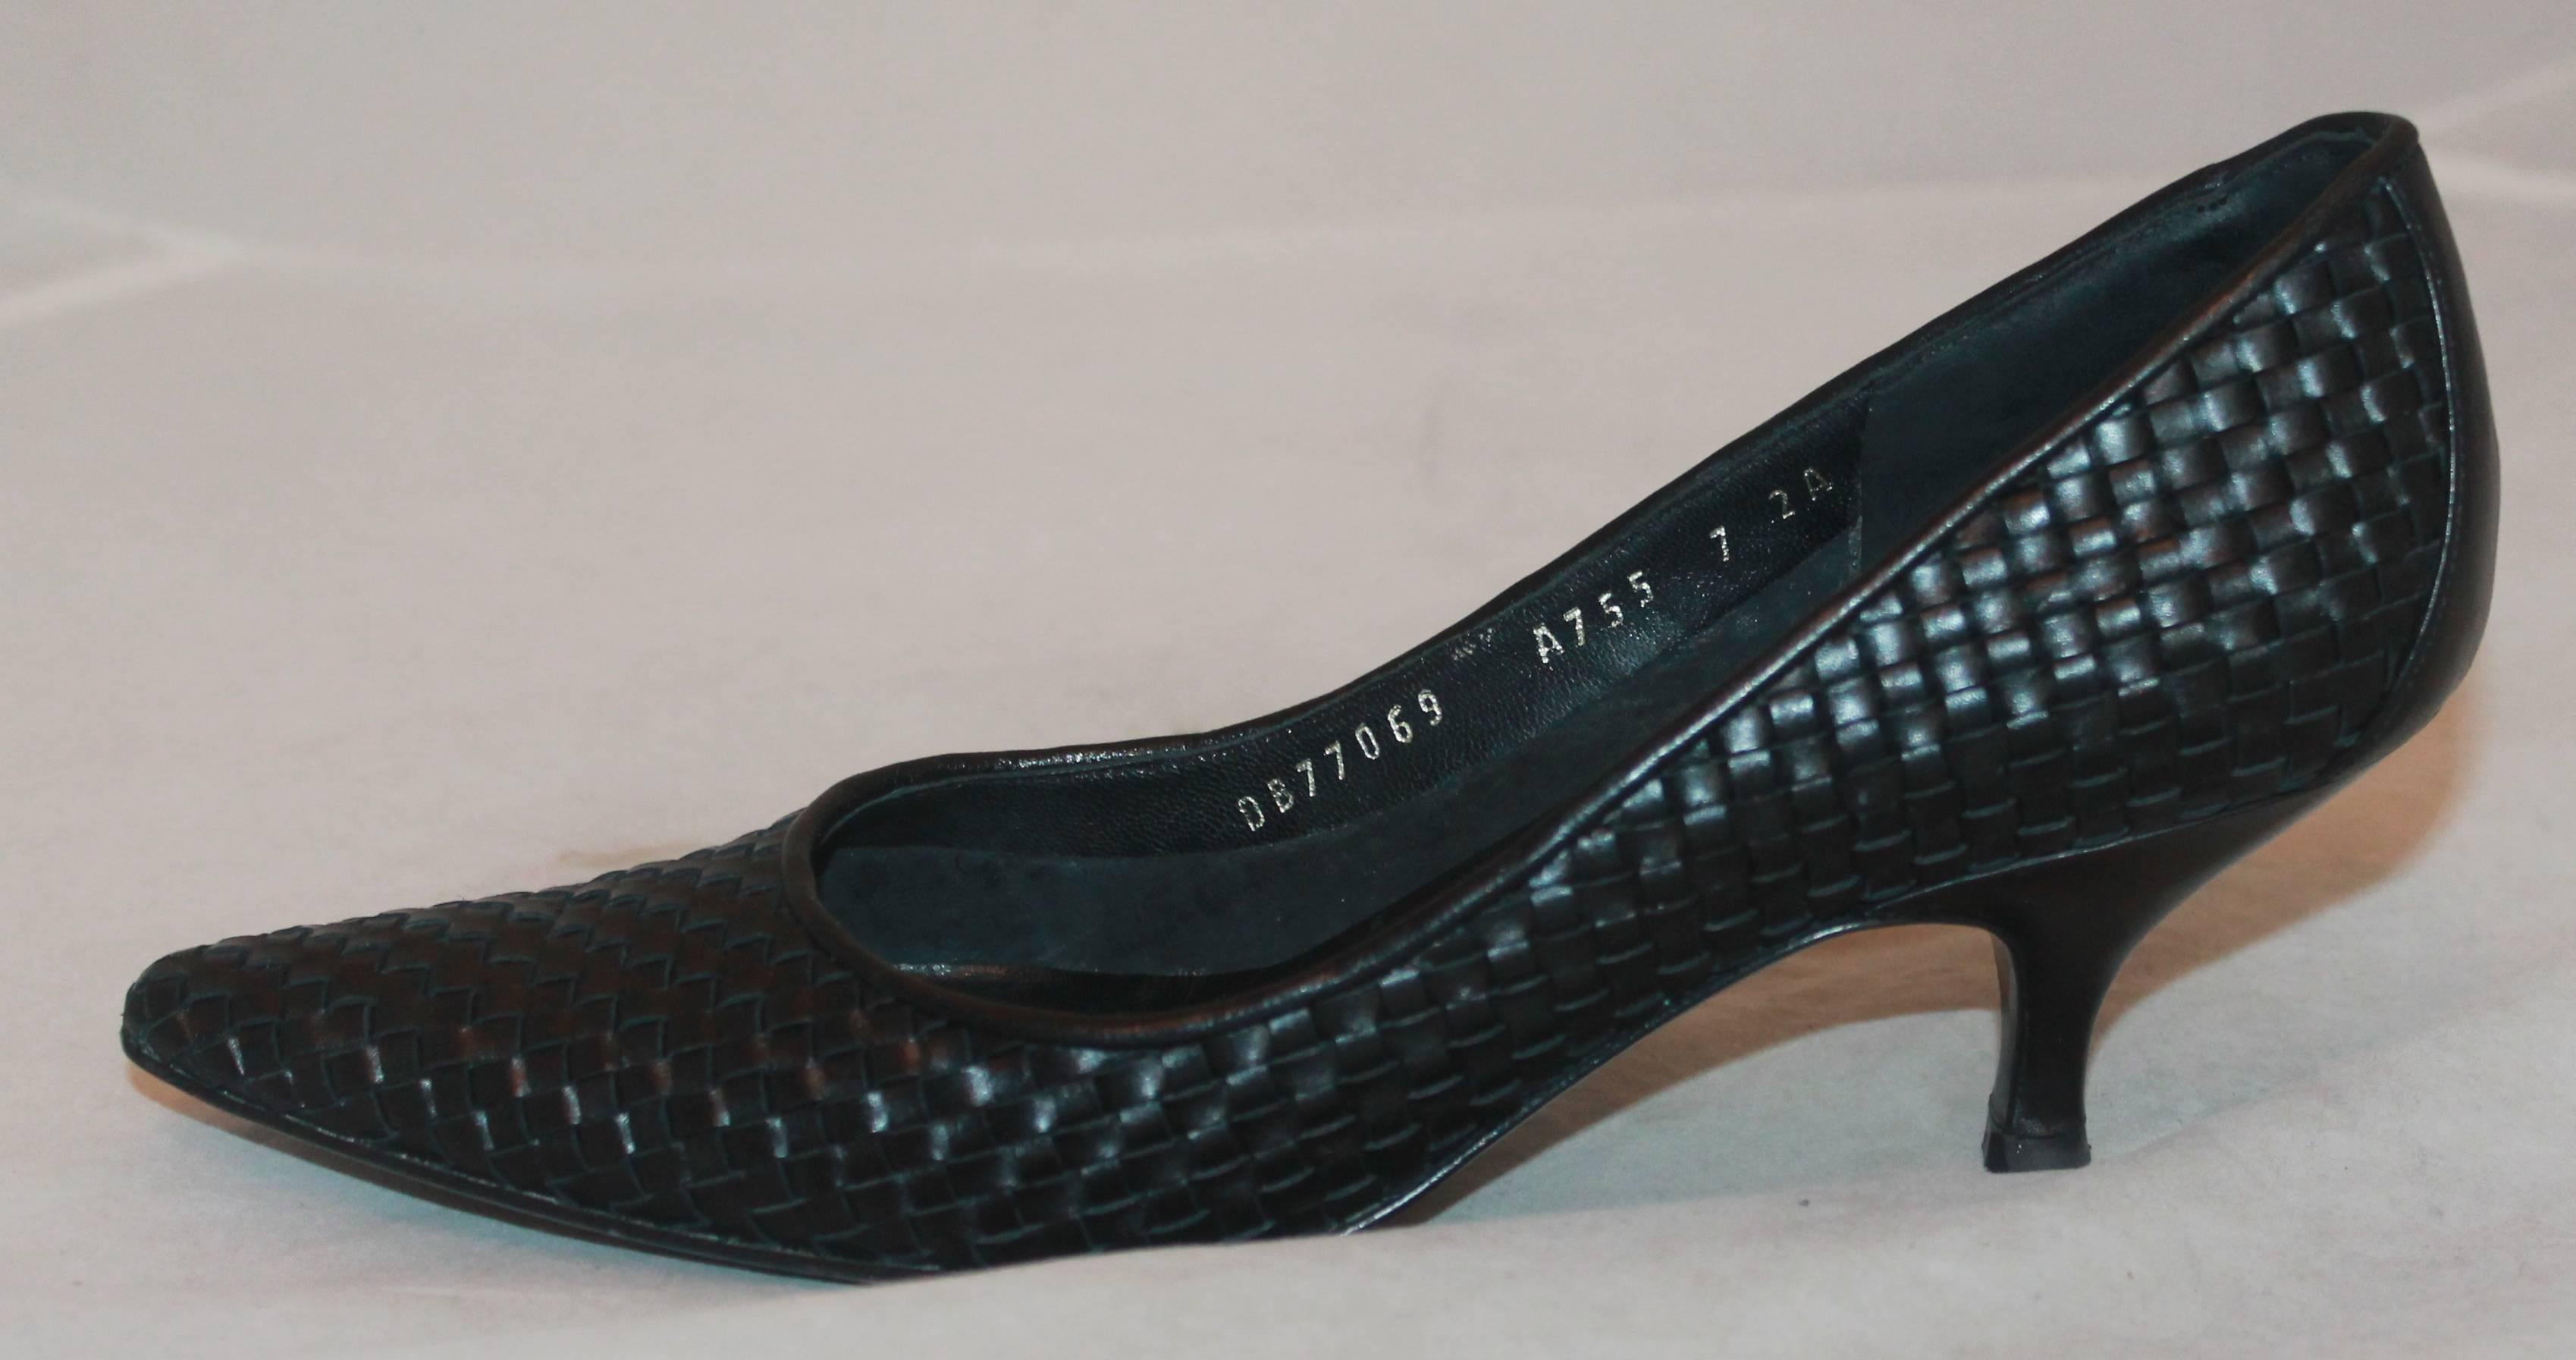 Salvatore Ferragamo Black Woven Leather Pump - 7AA.  These shoes are in excellent condition with only visible wear to the soles.  They feature a lovely black leather, an intricate woven pattern throughout, a rounded pointed toe, and a kitten